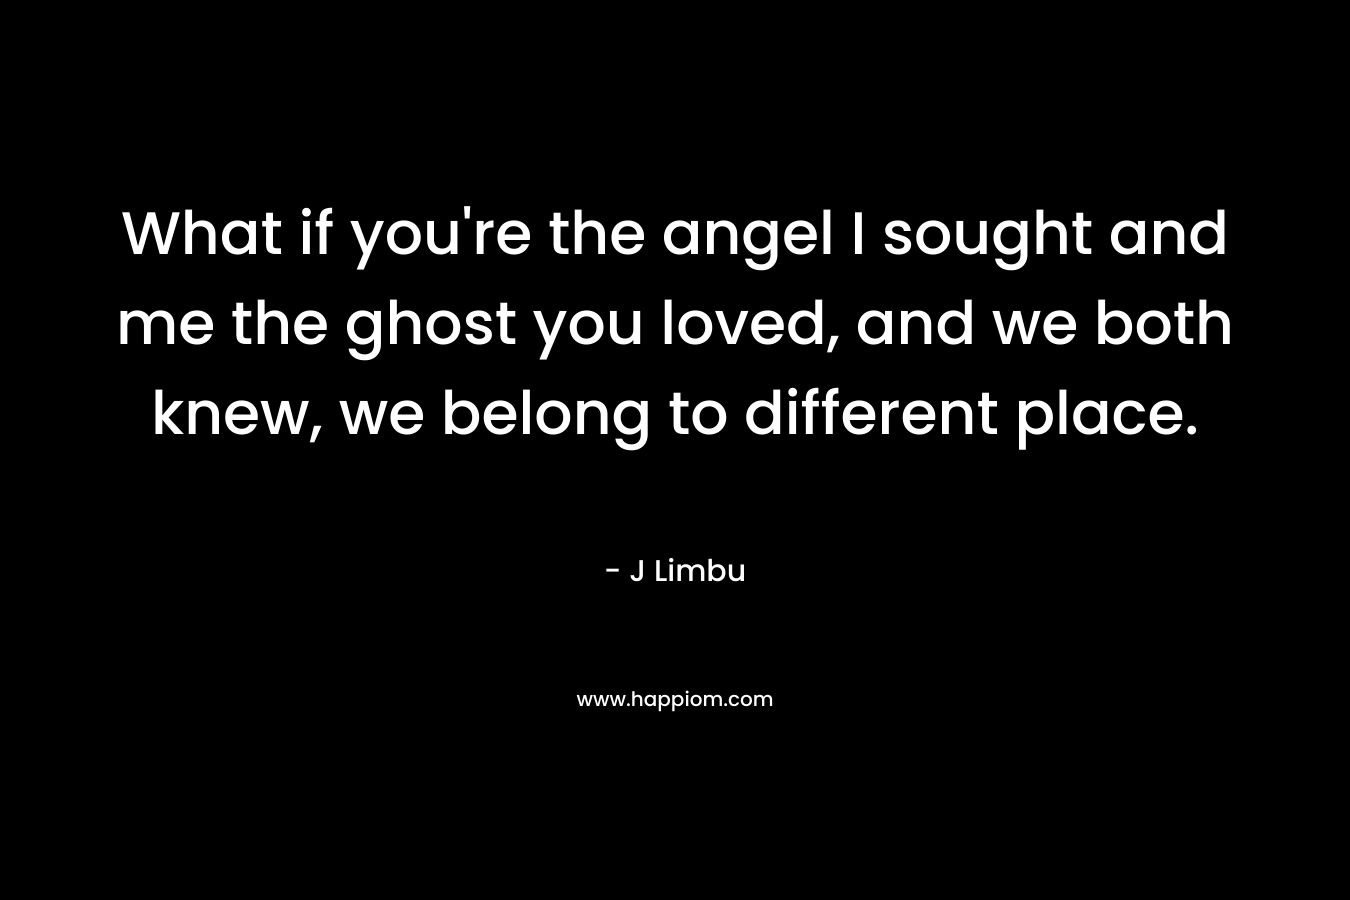 What if you’re the angel I sought and me the ghost you loved, and we both knew, we belong to different place. – J Limbu